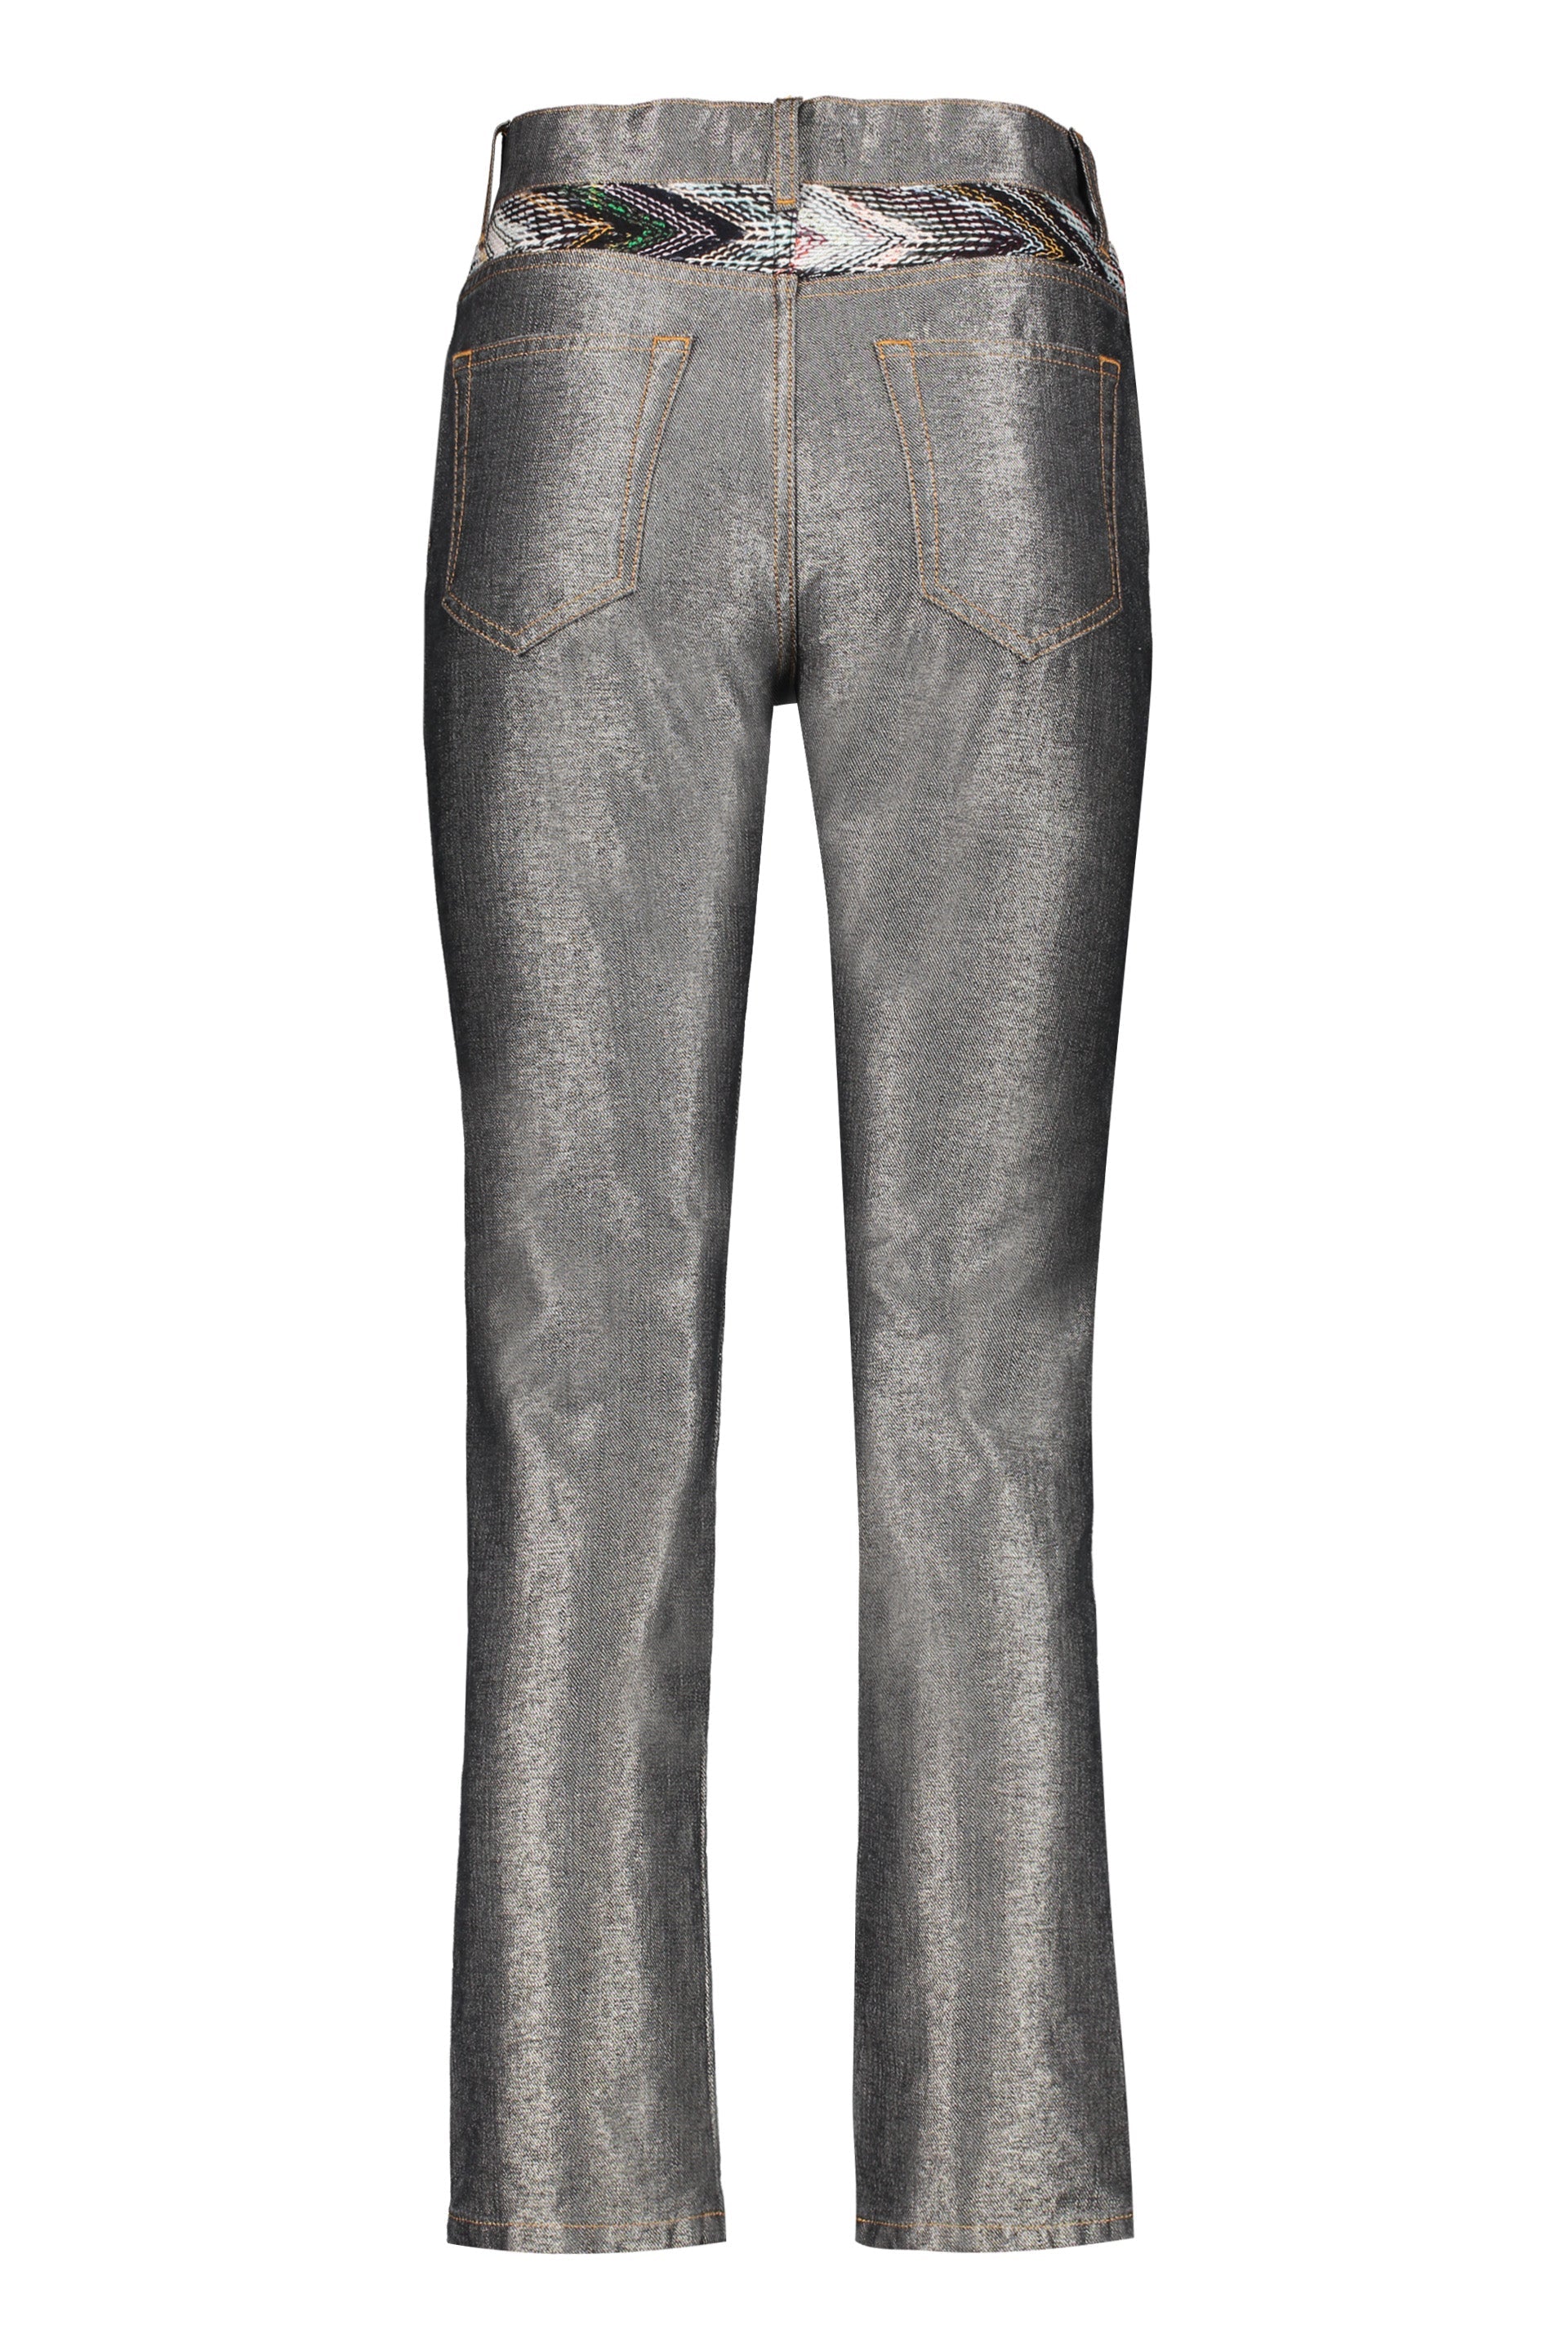 Missoni-OUTLET-SALE-Straight-leg-trousers-Hosen-ARCHIVE-COLLECTION-2.jpg